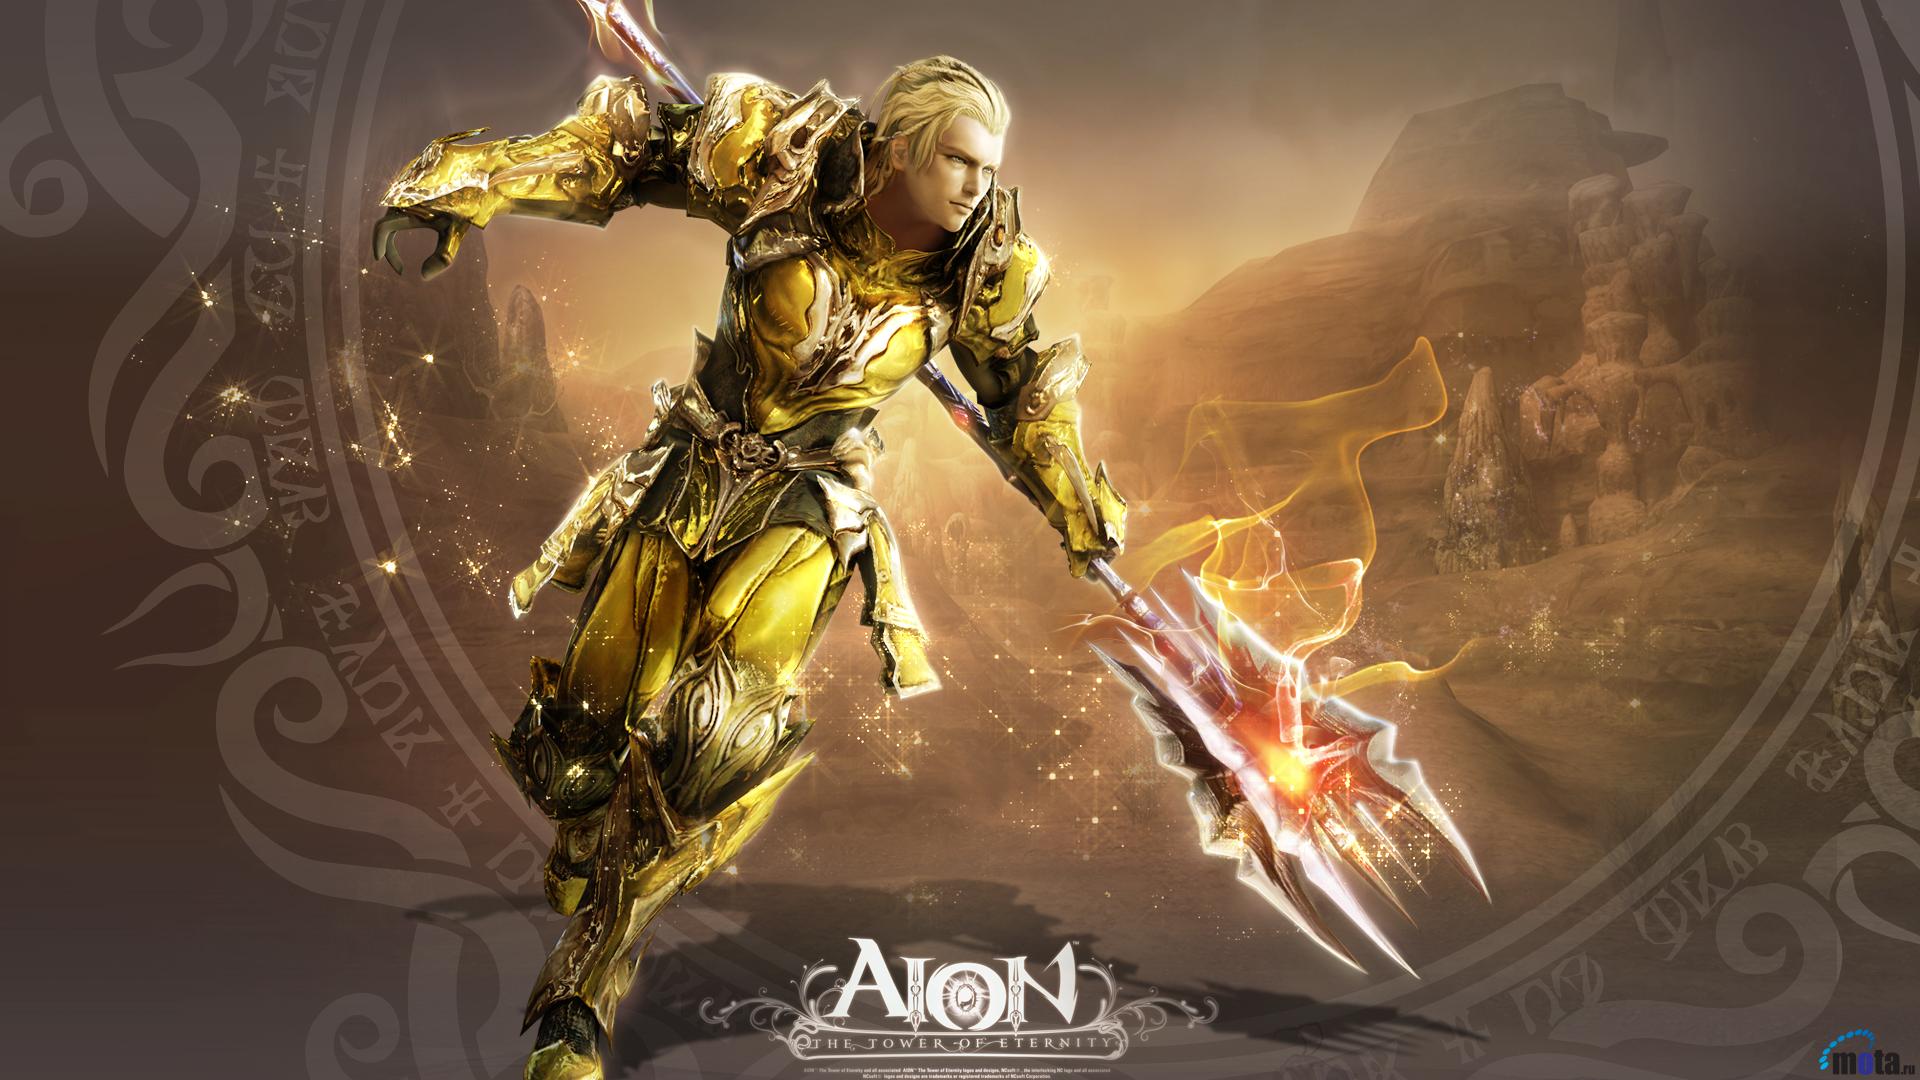 More Wallpaper Aion The Tower Of Eternity